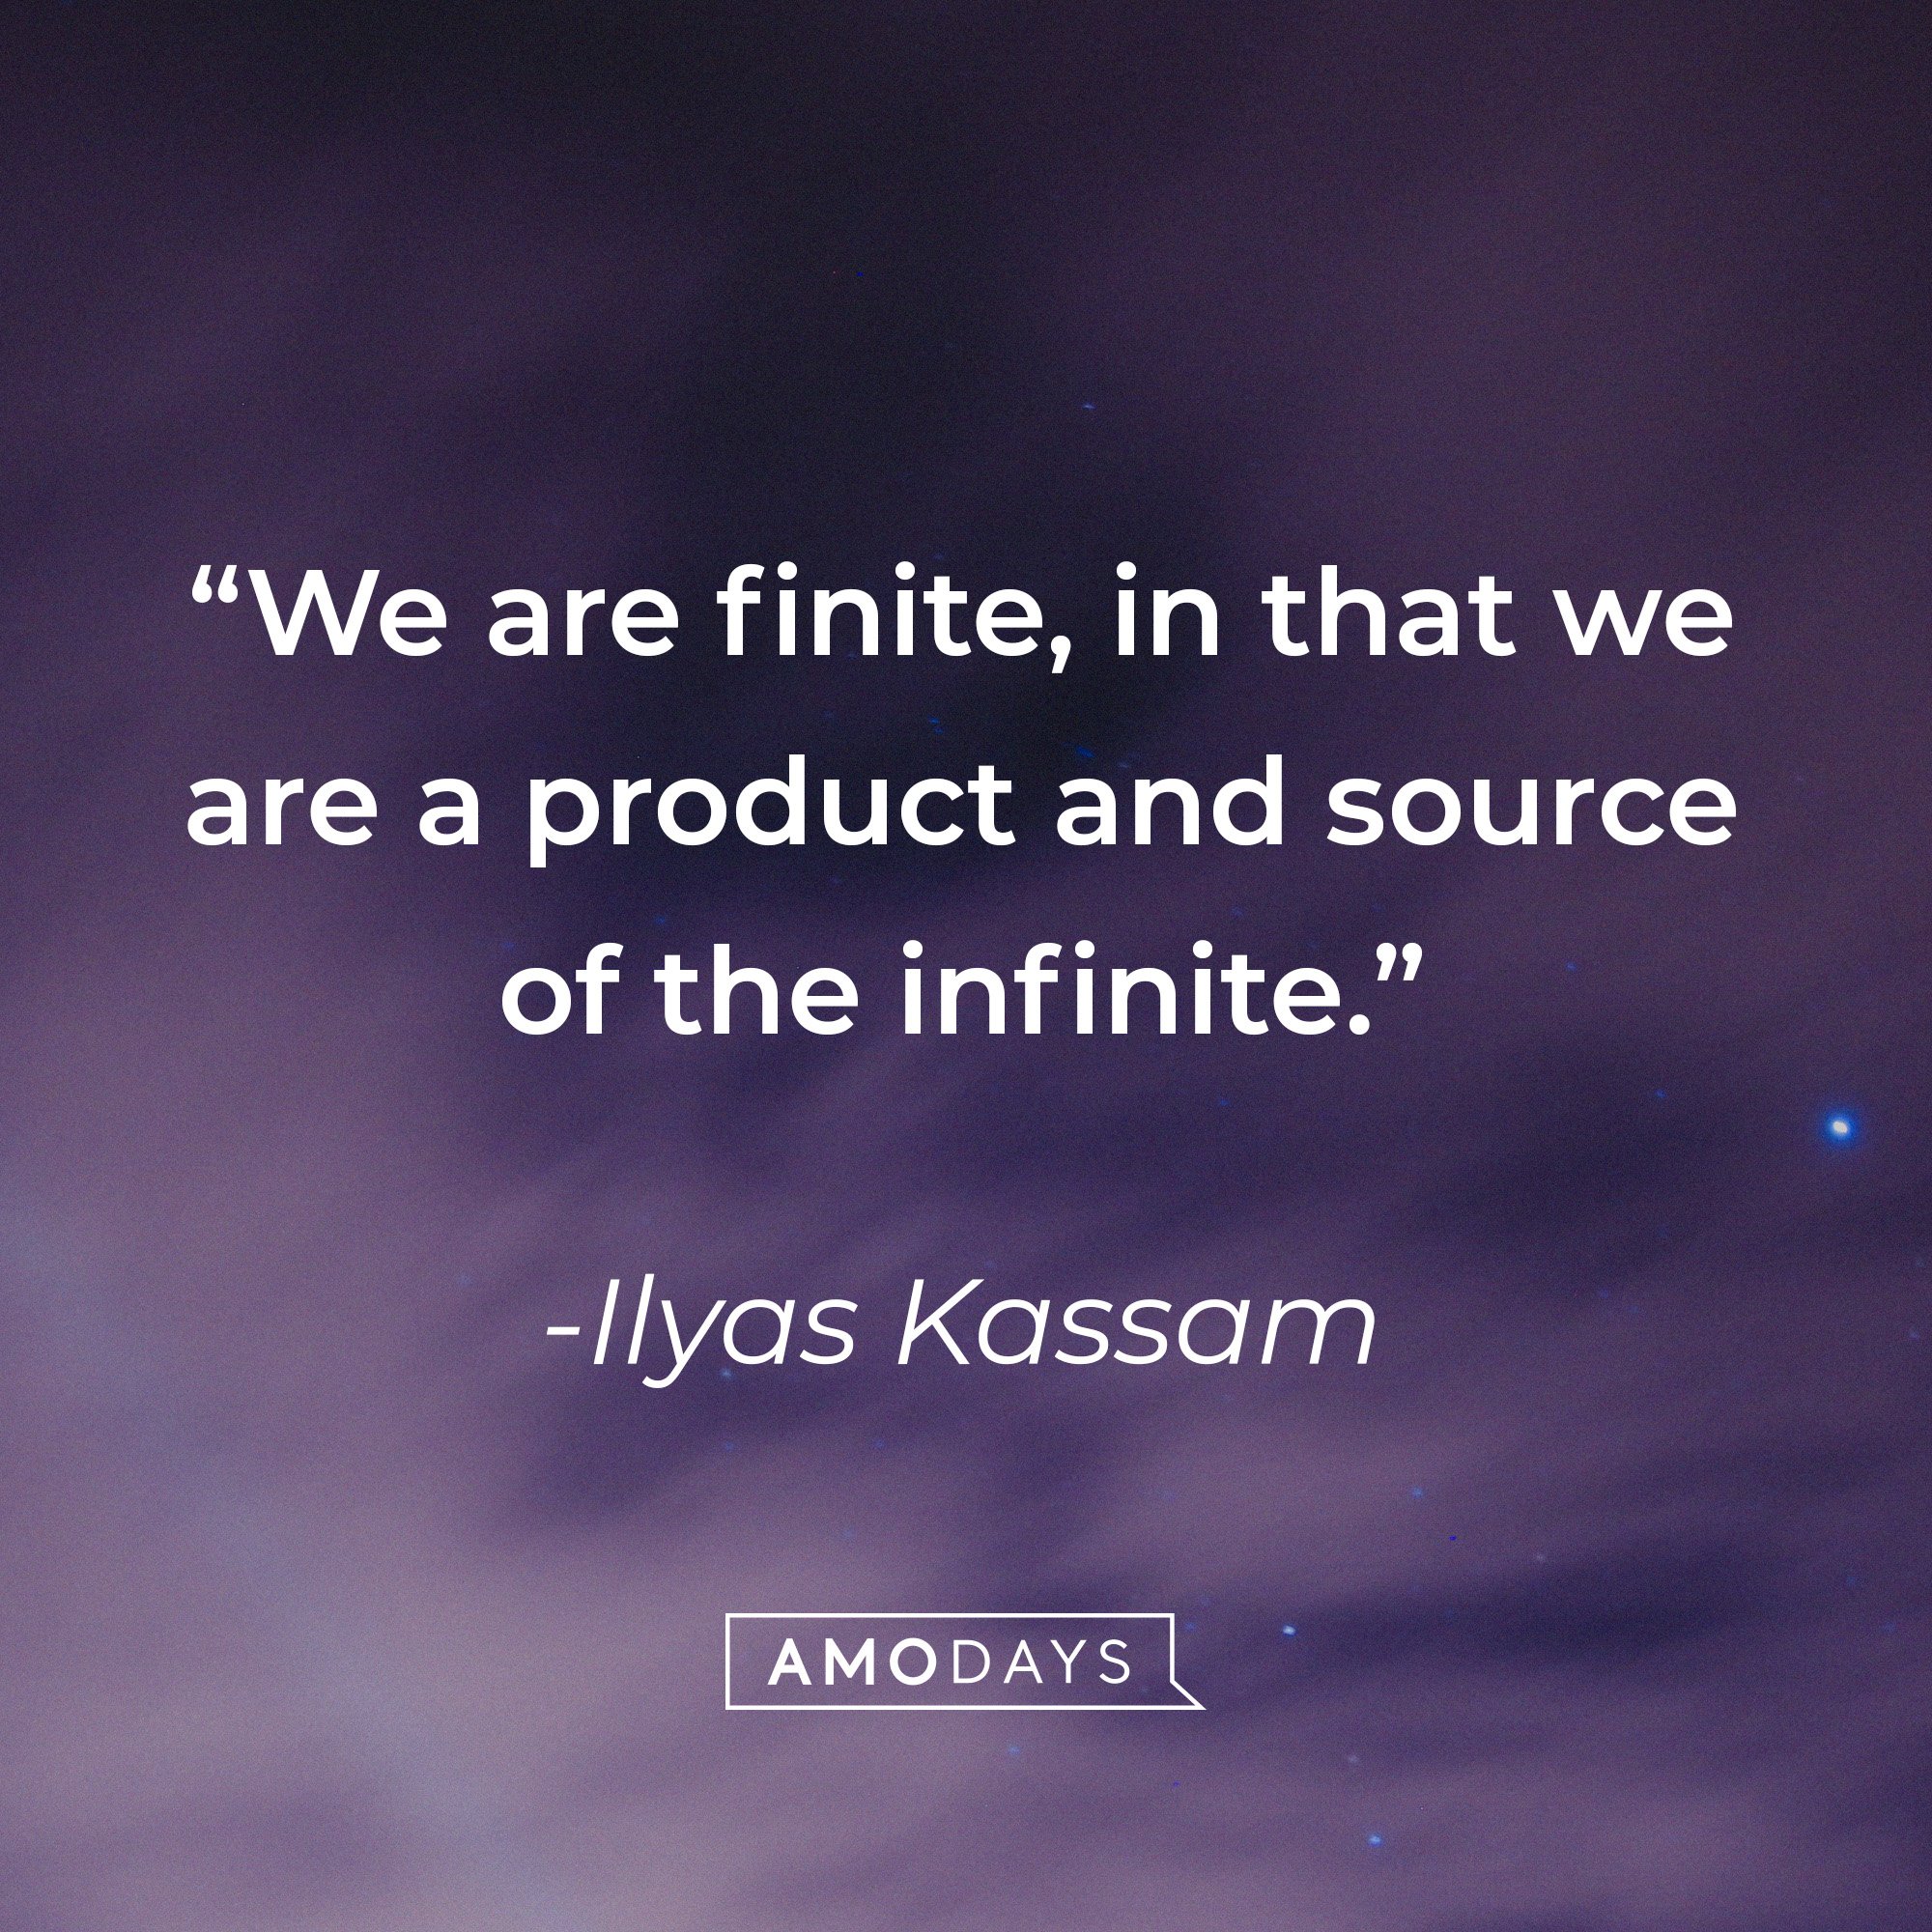 Ilyas Kassam’s quote: “We are finite, in that we are a product and source of the infinite.” | Image: AmoDays